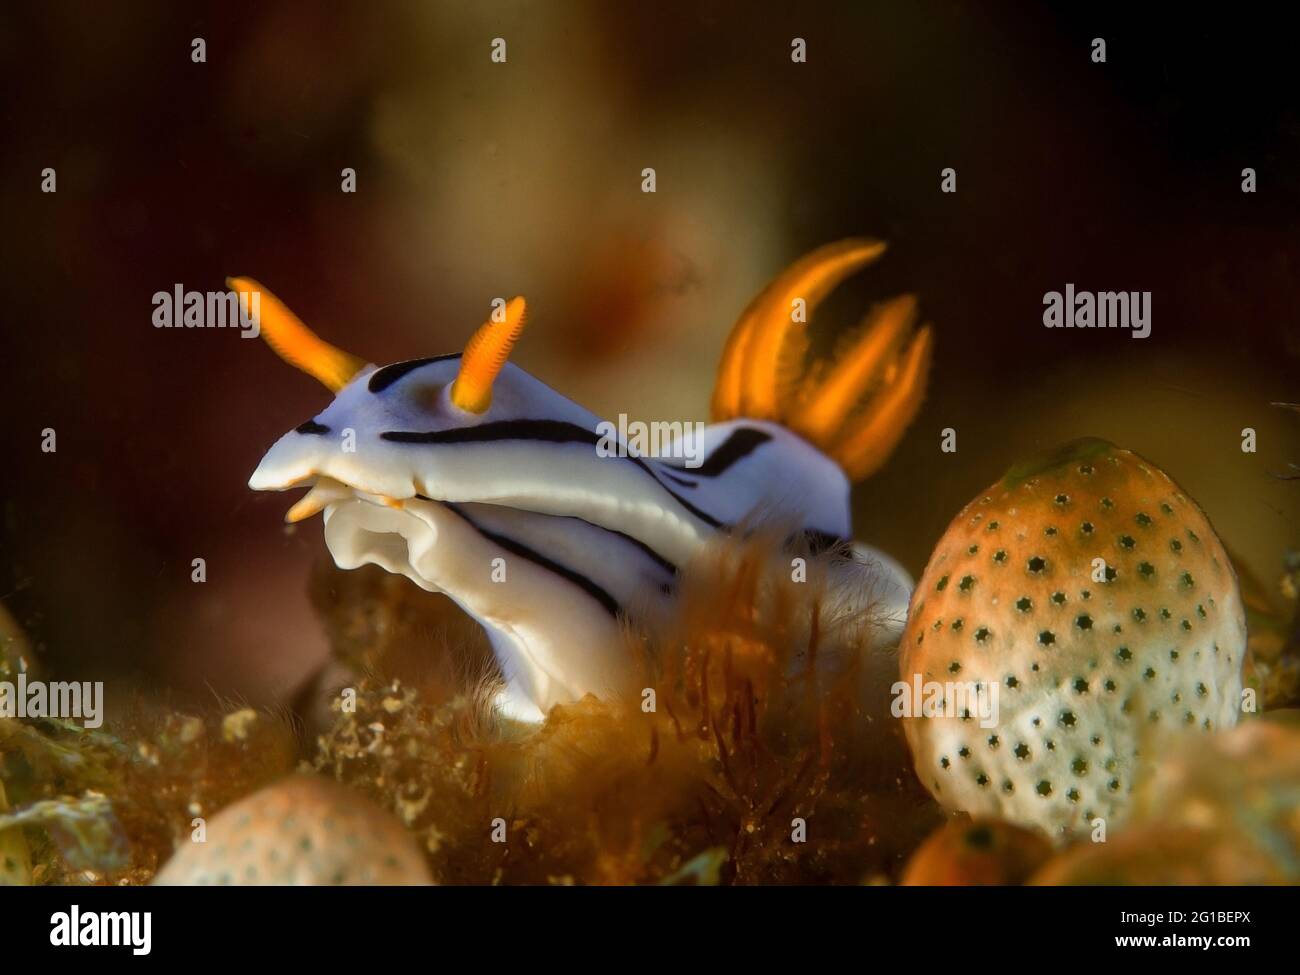 Light blue nudibranch mollusk with yellow rhinophores and tentacles sitting on reef in sea depth Stock Photo